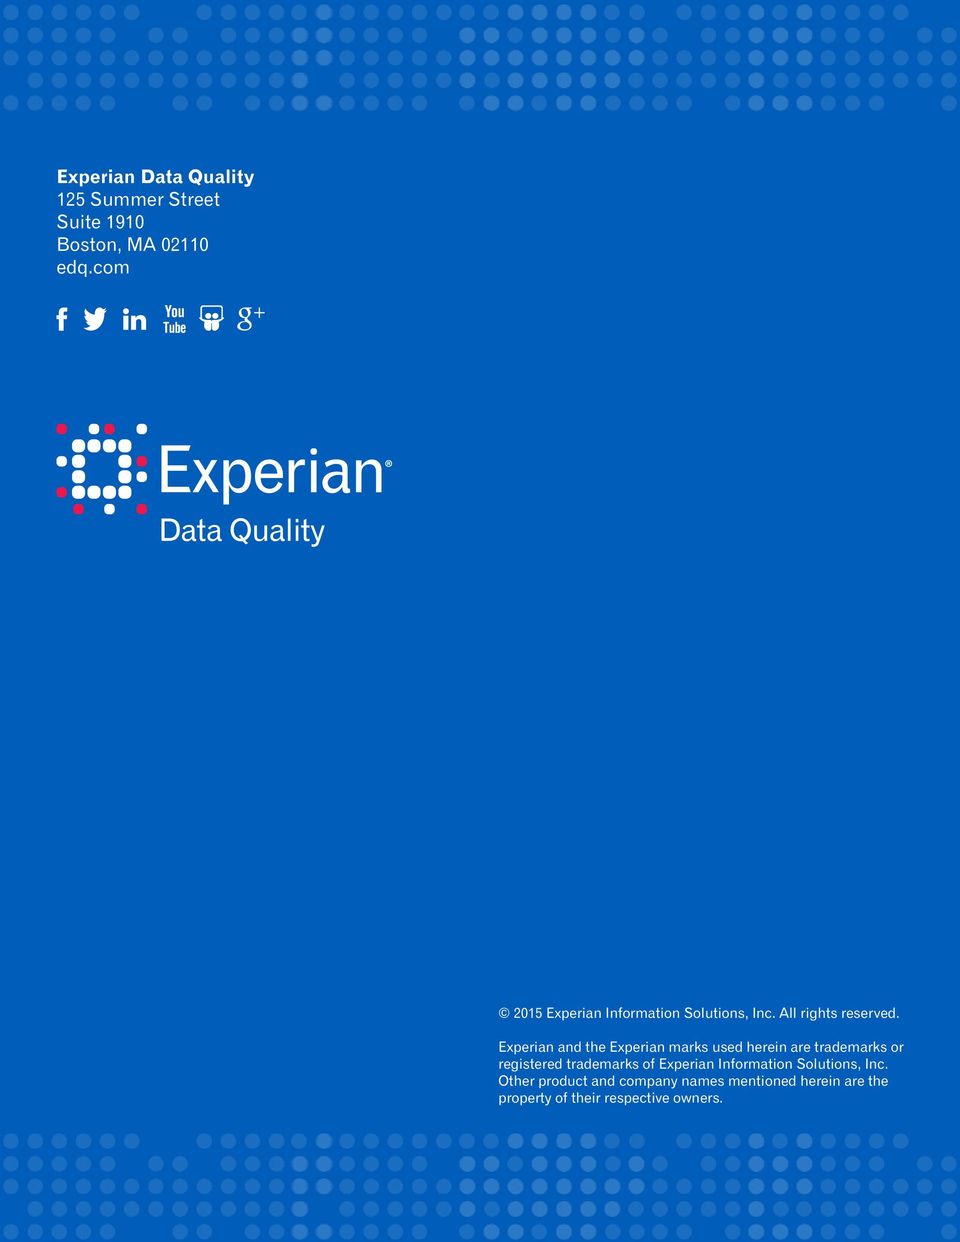 Experian and the Experian marks used herein are trademarks or registered trademarks of